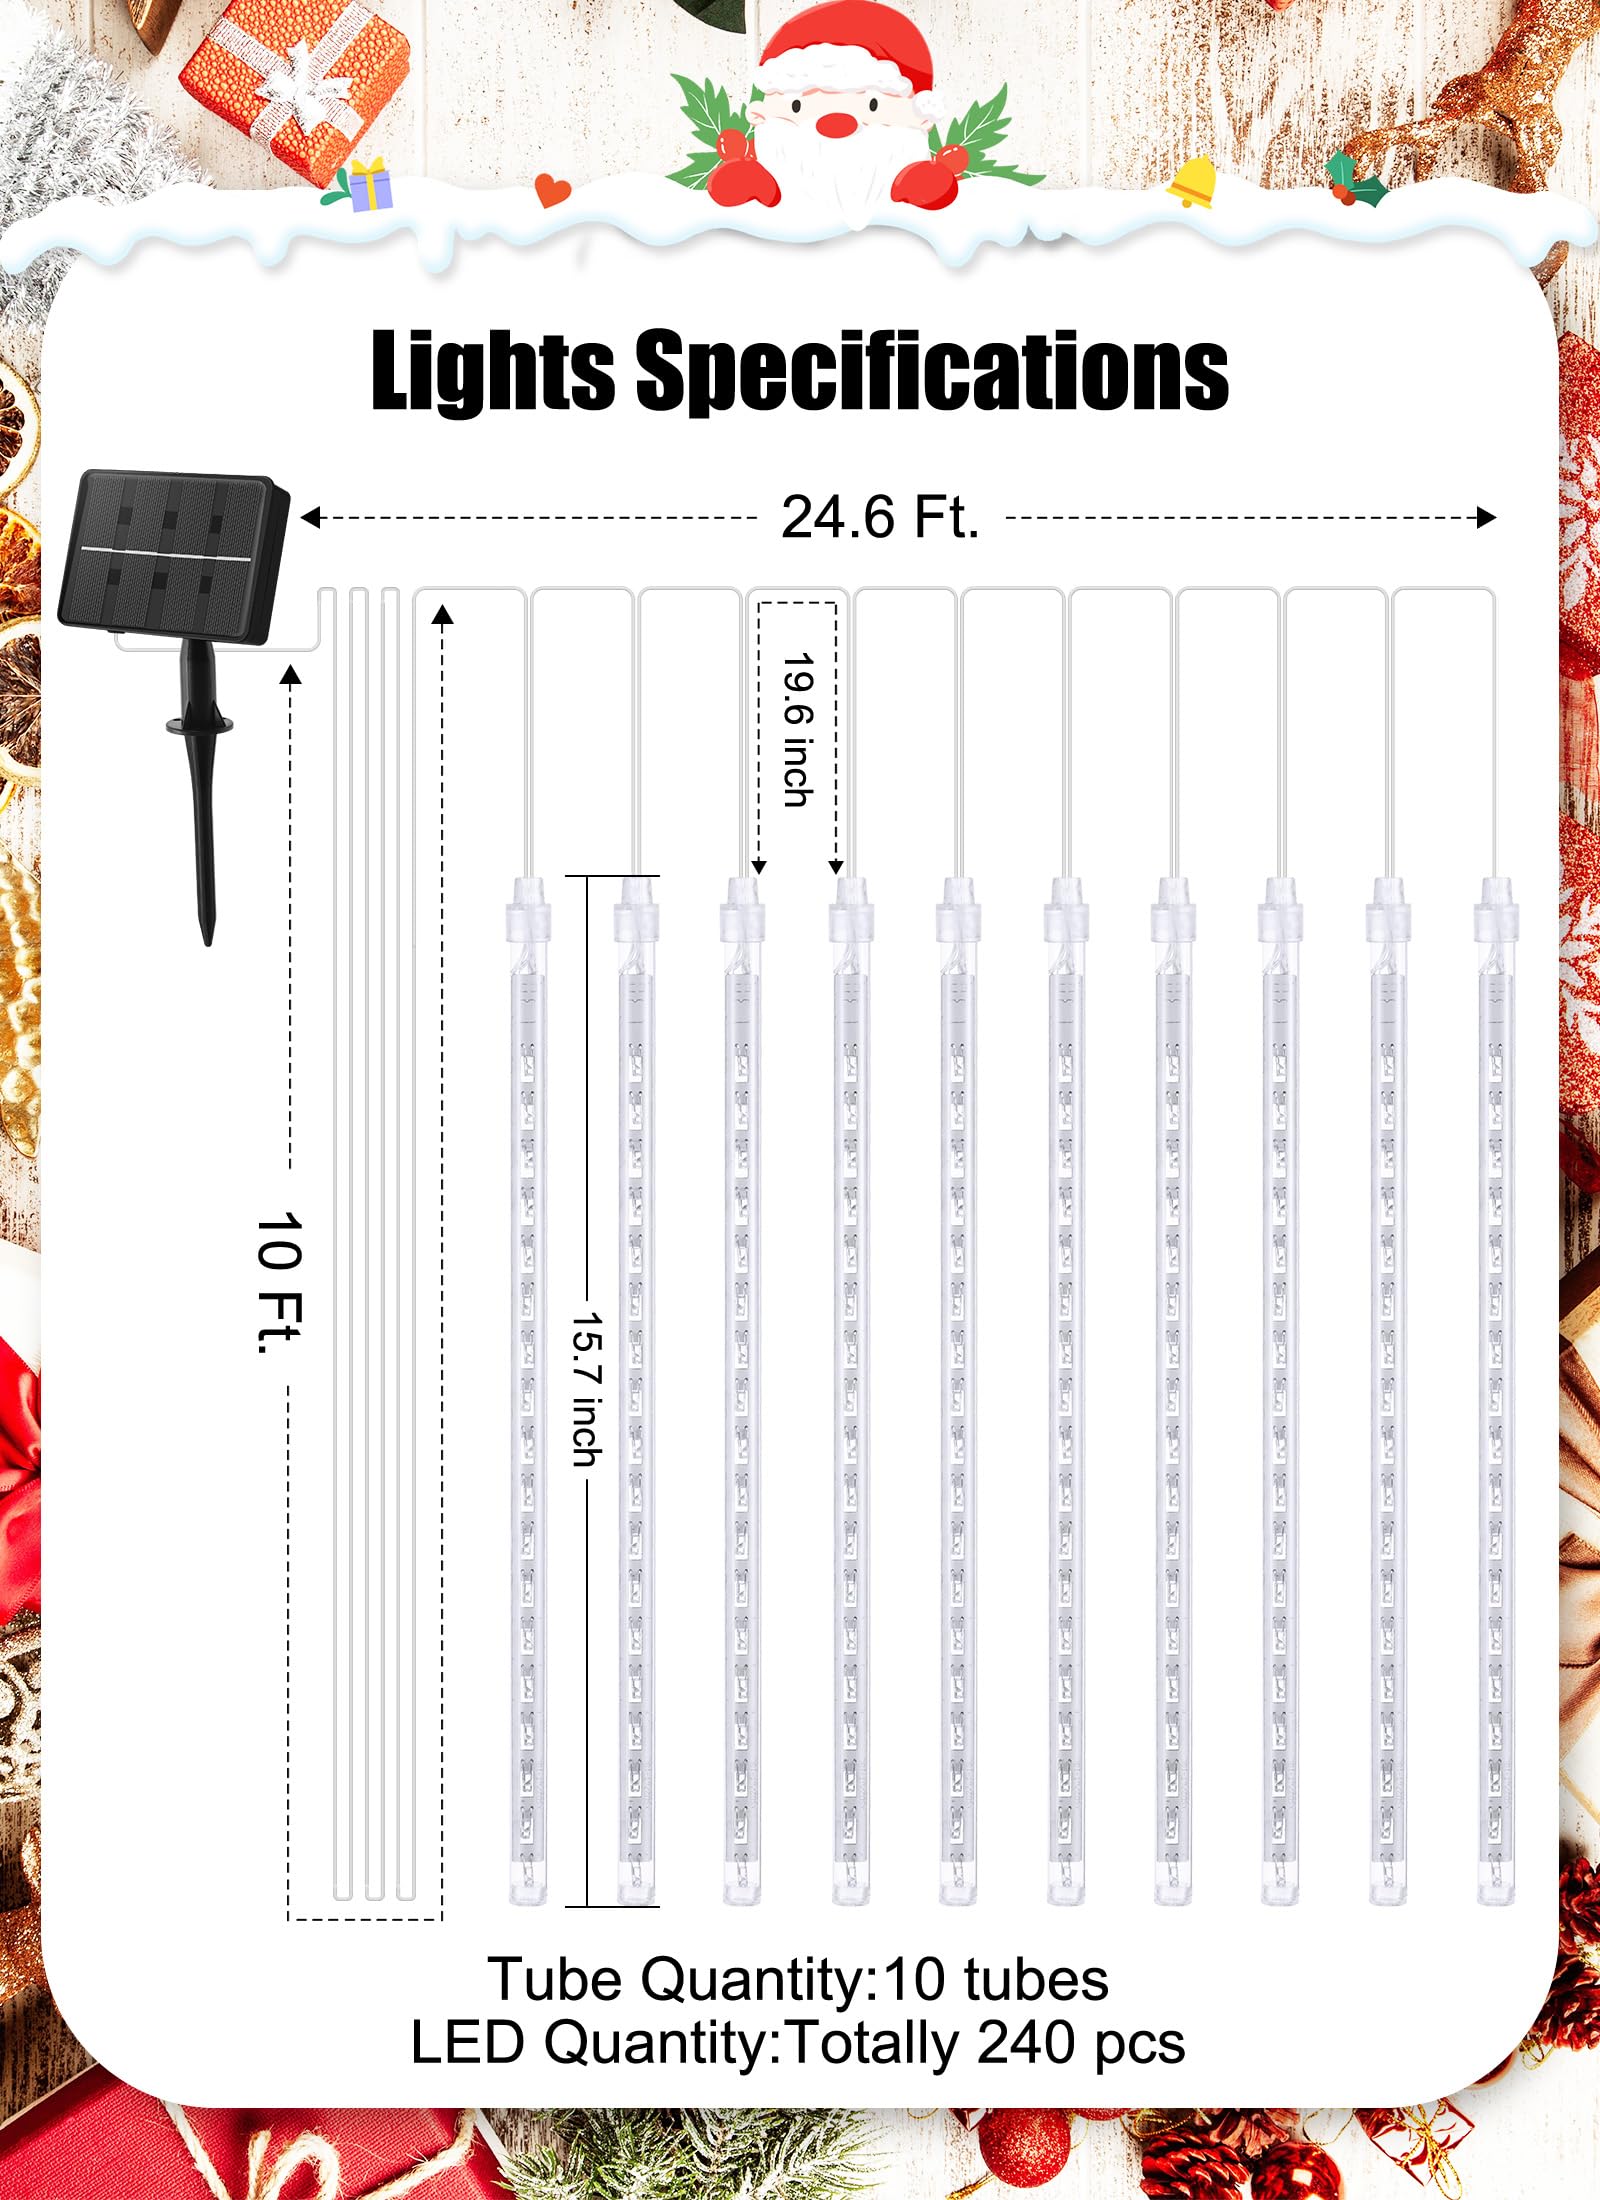 1 x 16 Inches / 10 Tubes / 240 LED / Multicolor